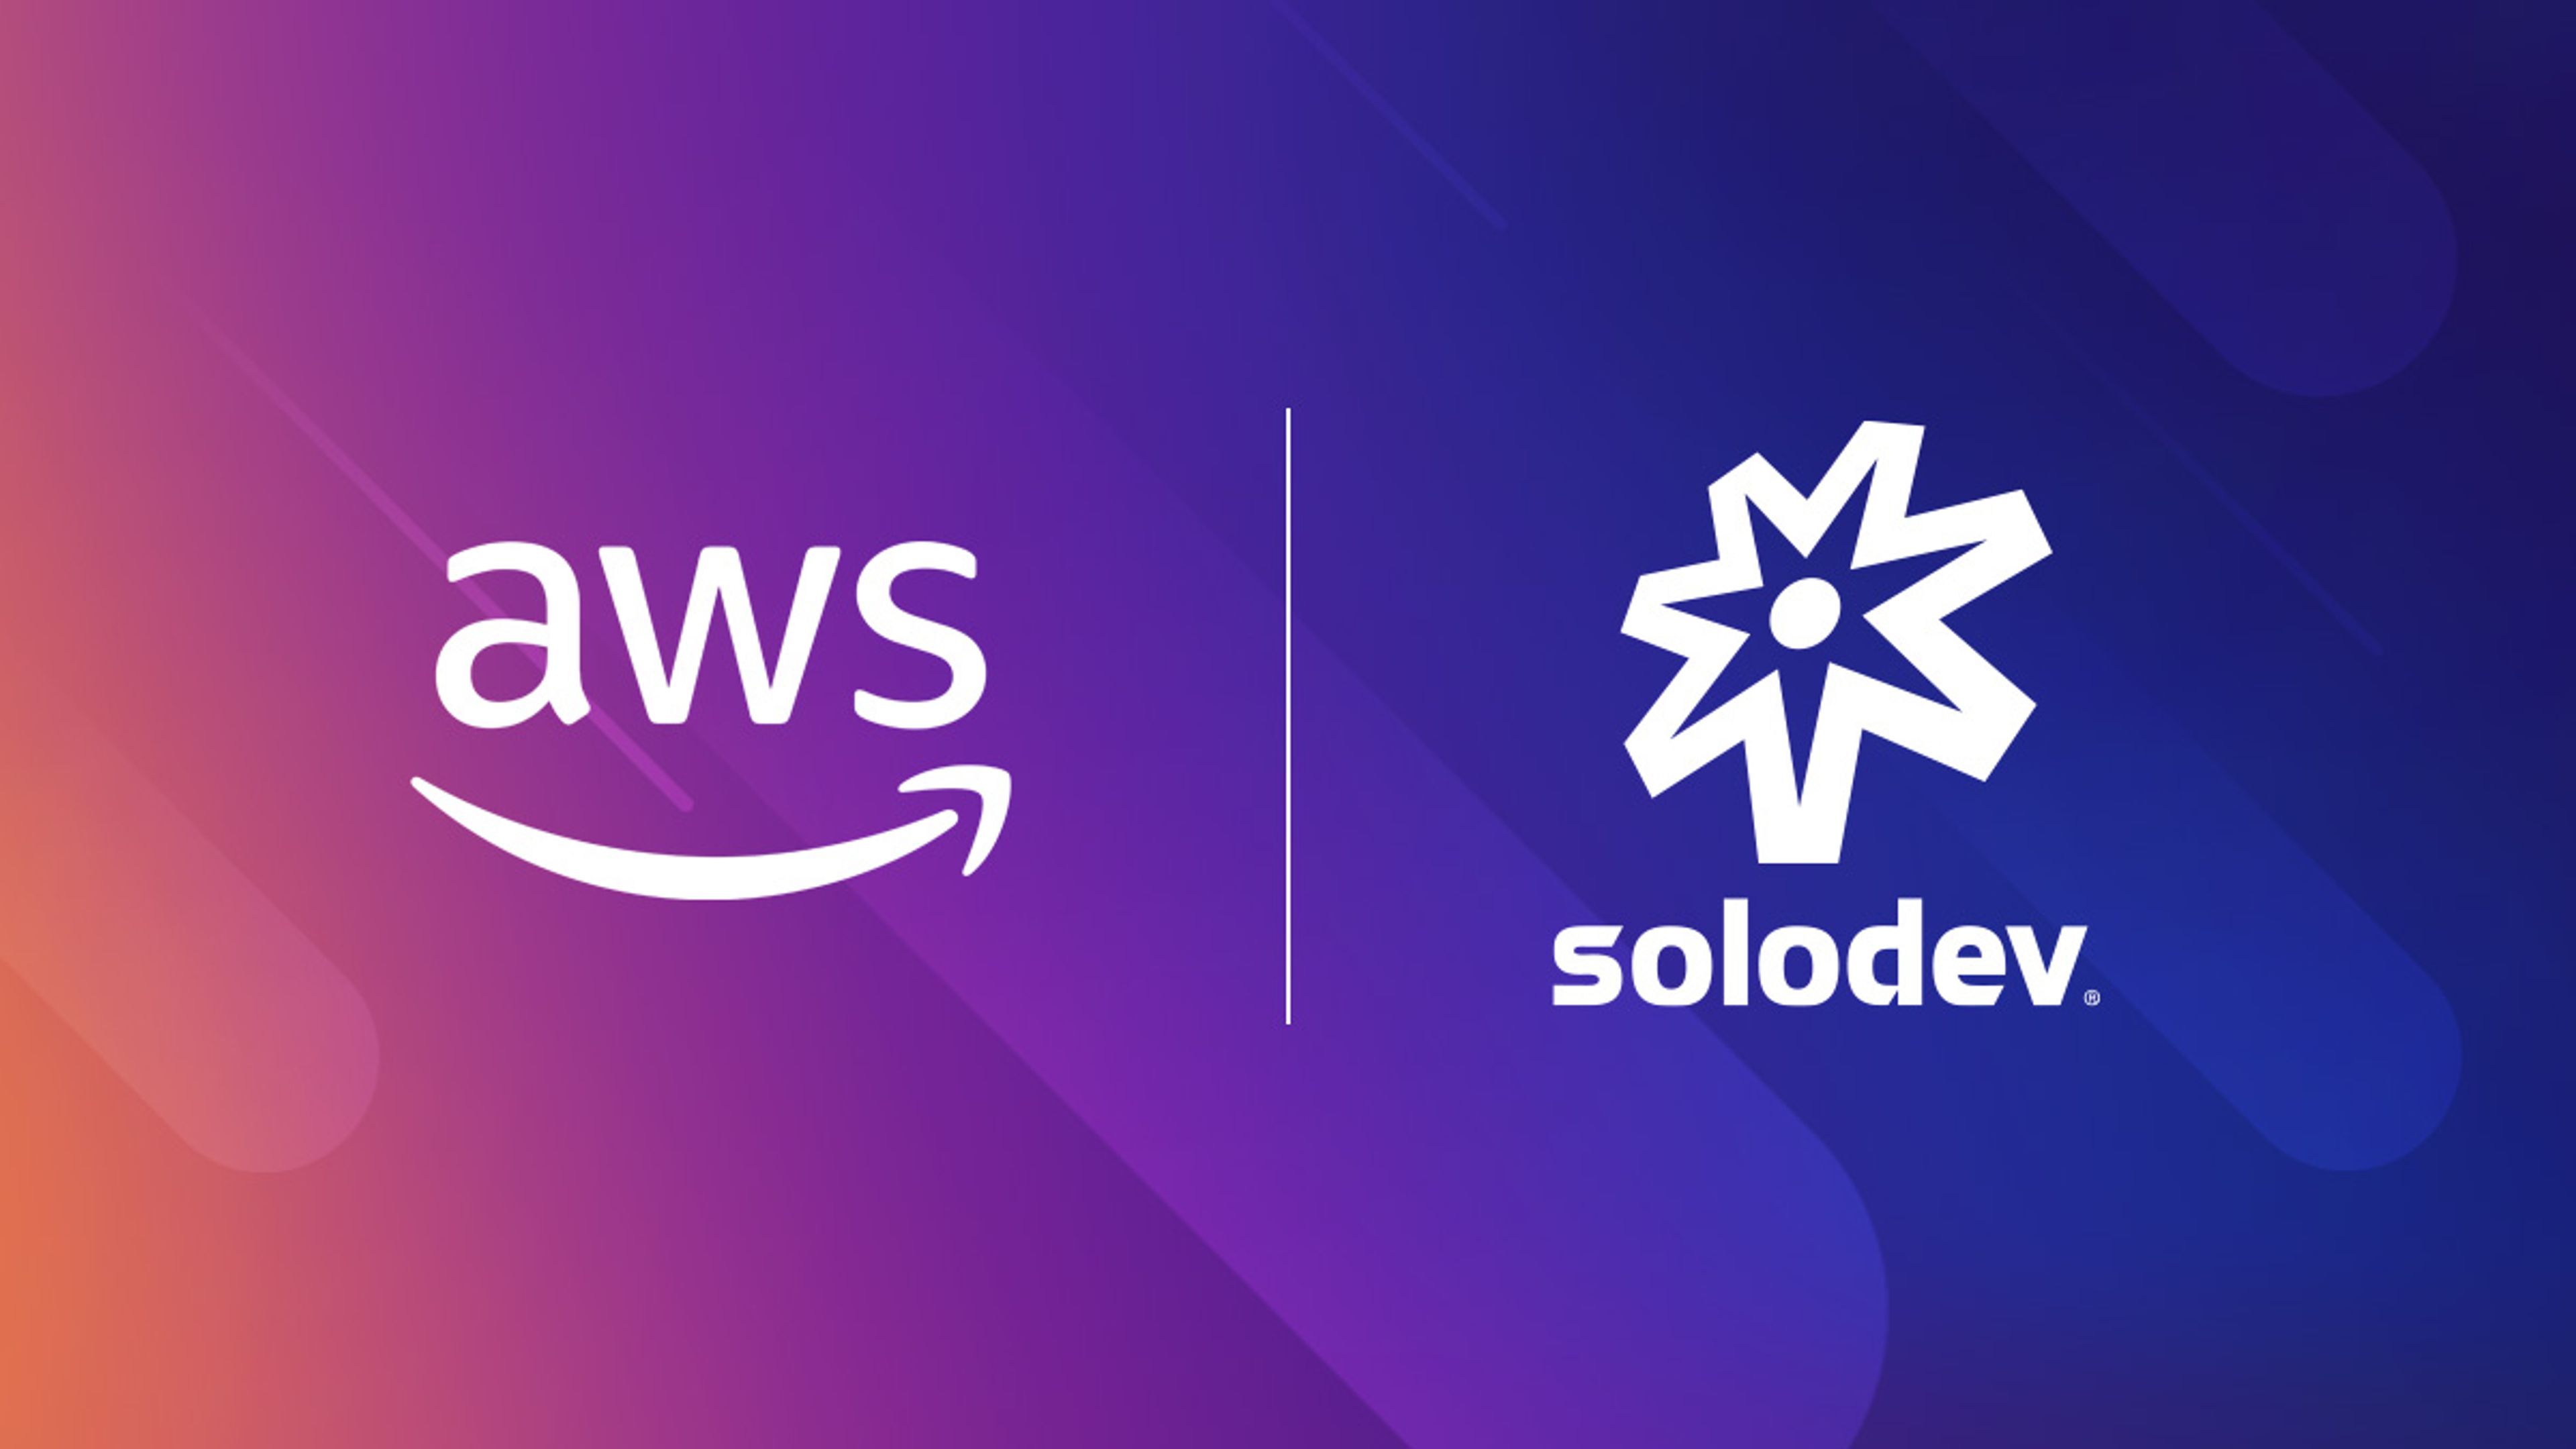 AWS and Solodev logos against a dark background with vector graphics elements.